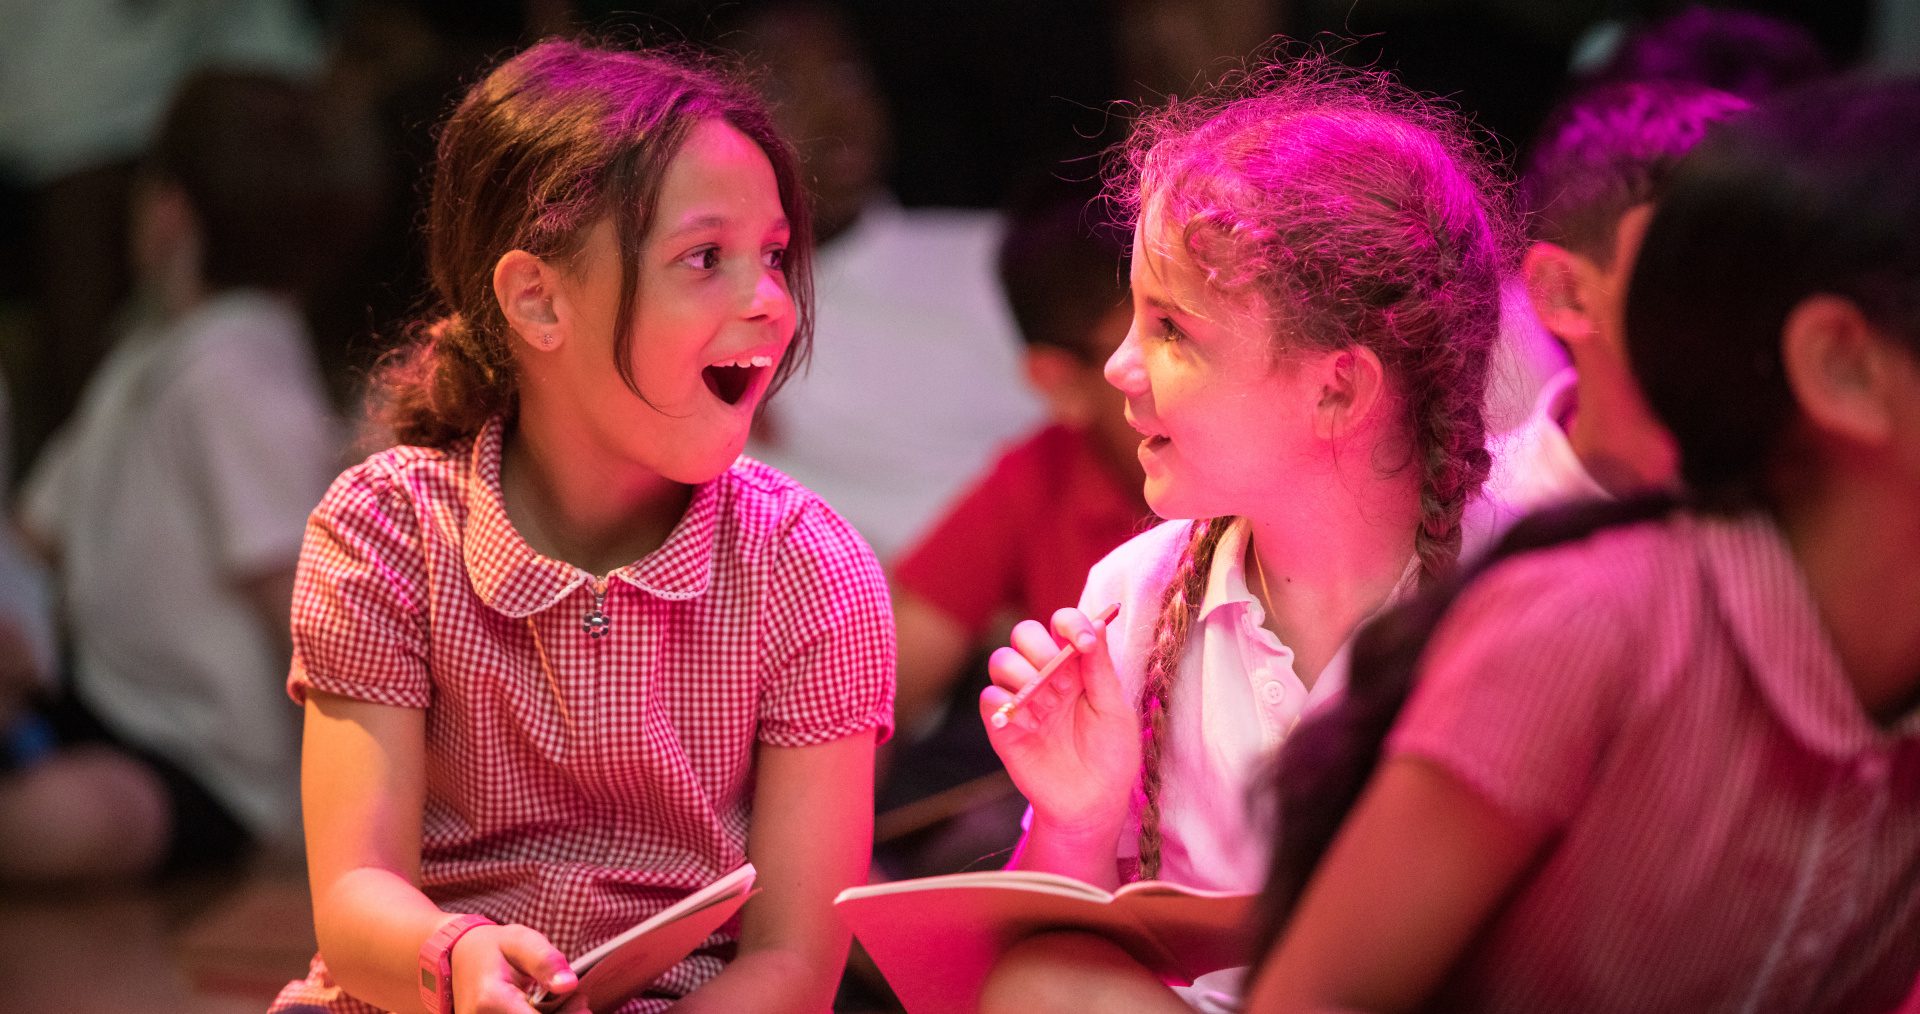 Two young girls, hair in plaits, wearing school uniform dresses, sit on the floor writing and excitedly exchange ideas